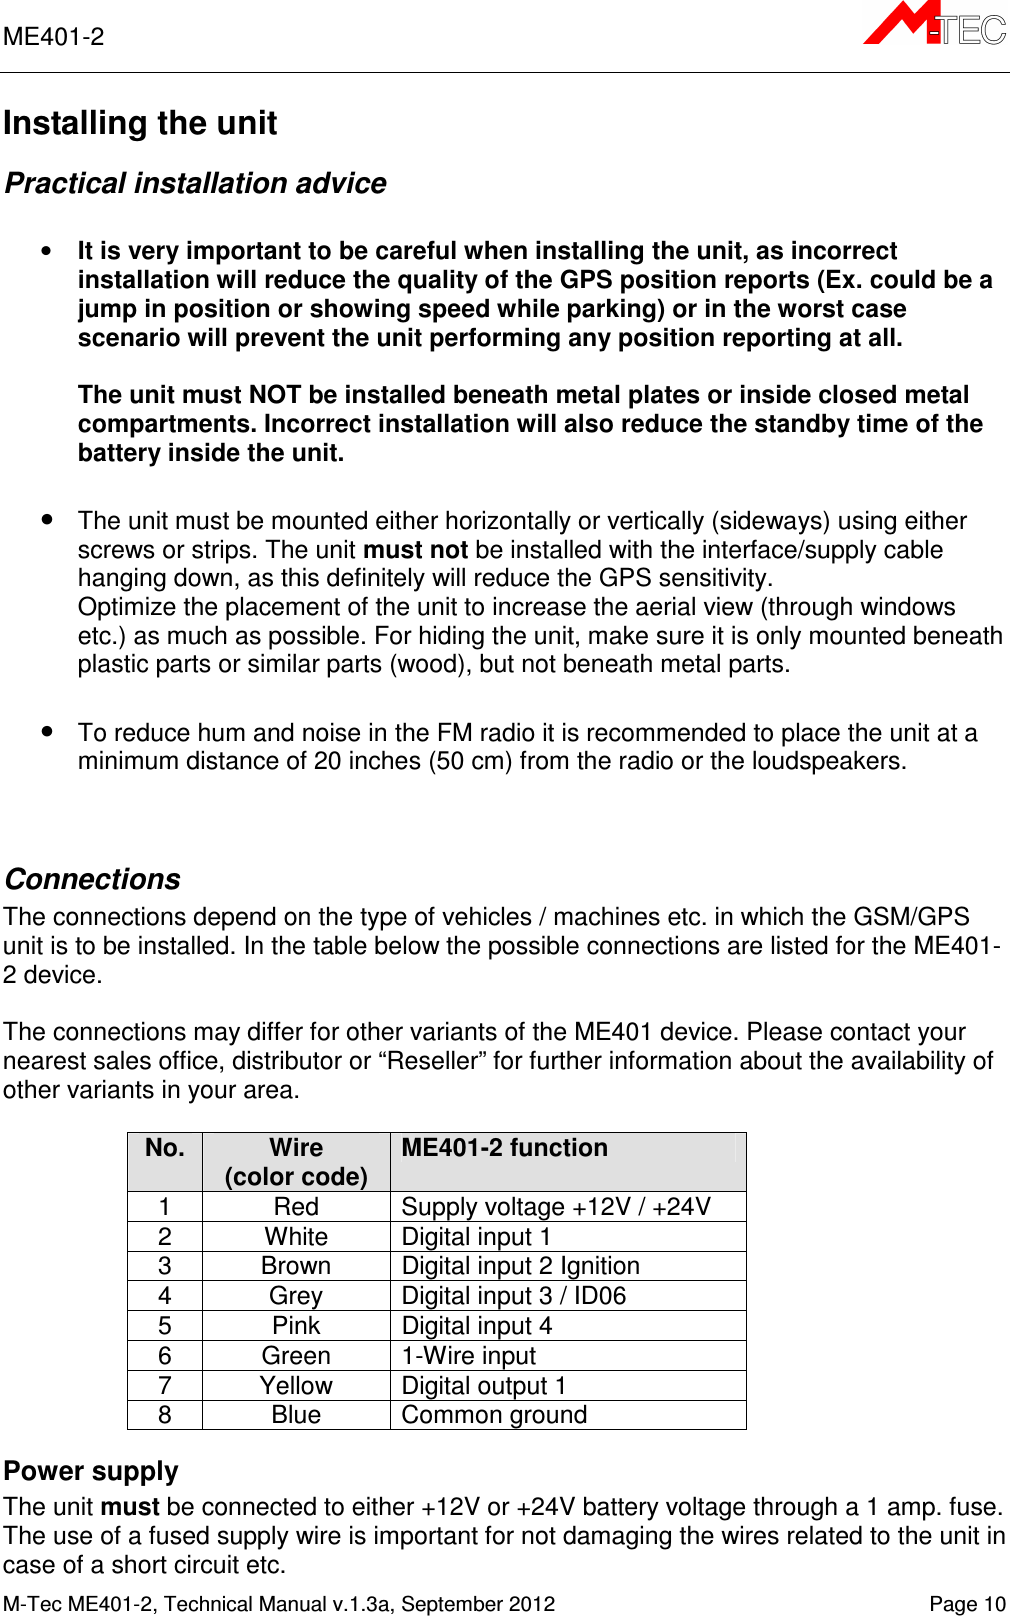 ME401-2       M-Tec ME401-2, Technical Manual v.1.3a, September 2012   Page 10 Installing the unit Practical installation advice  • It is very important to be careful when installing the unit, as incorrect installation will reduce the quality of the GPS position reports (Ex. could be a jump in position or showing speed while parking) or in the worst case scenario will prevent the unit performing any position reporting at all.  The unit must NOT be installed beneath metal plates or inside closed metal compartments. Incorrect installation will also reduce the standby time of the battery inside the unit.  • The unit must be mounted either horizontally or vertically (sideways) using either screws or strips. The unit must not be installed with the interface/supply cable hanging down, as this definitely will reduce the GPS sensitivity.  Optimize the placement of the unit to increase the aerial view (through windows etc.) as much as possible. For hiding the unit, make sure it is only mounted beneath plastic parts or similar parts (wood), but not beneath metal parts.   • To reduce hum and noise in the FM radio it is recommended to place the unit at a minimum distance of 20 inches (50 cm) from the radio or the loudspeakers.   Connections The connections depend on the type of vehicles / machines etc. in which the GSM/GPS unit is to be installed. In the table below the possible connections are listed for the ME401-2 device.  The connections may differ for other variants of the ME401 device. Please contact your nearest sales office, distributor or “Reseller” for further information about the availability of other variants in your area.  No. Wire (color code) ME401-2 function 1  Red  Supply voltage +12V / +24V 2  White  Digital input 1 3  Brown  Digital input 2 Ignition 4  Grey  Digital input 3 / ID06 5  Pink  Digital input 4 6  Green  1-Wire input 7  Yellow  Digital output 1 8  Blue  Common ground Power supply  The unit must be connected to either +12V or +24V battery voltage through a 1 amp. fuse. The use of a fused supply wire is important for not damaging the wires related to the unit in case of a short circuit etc. 